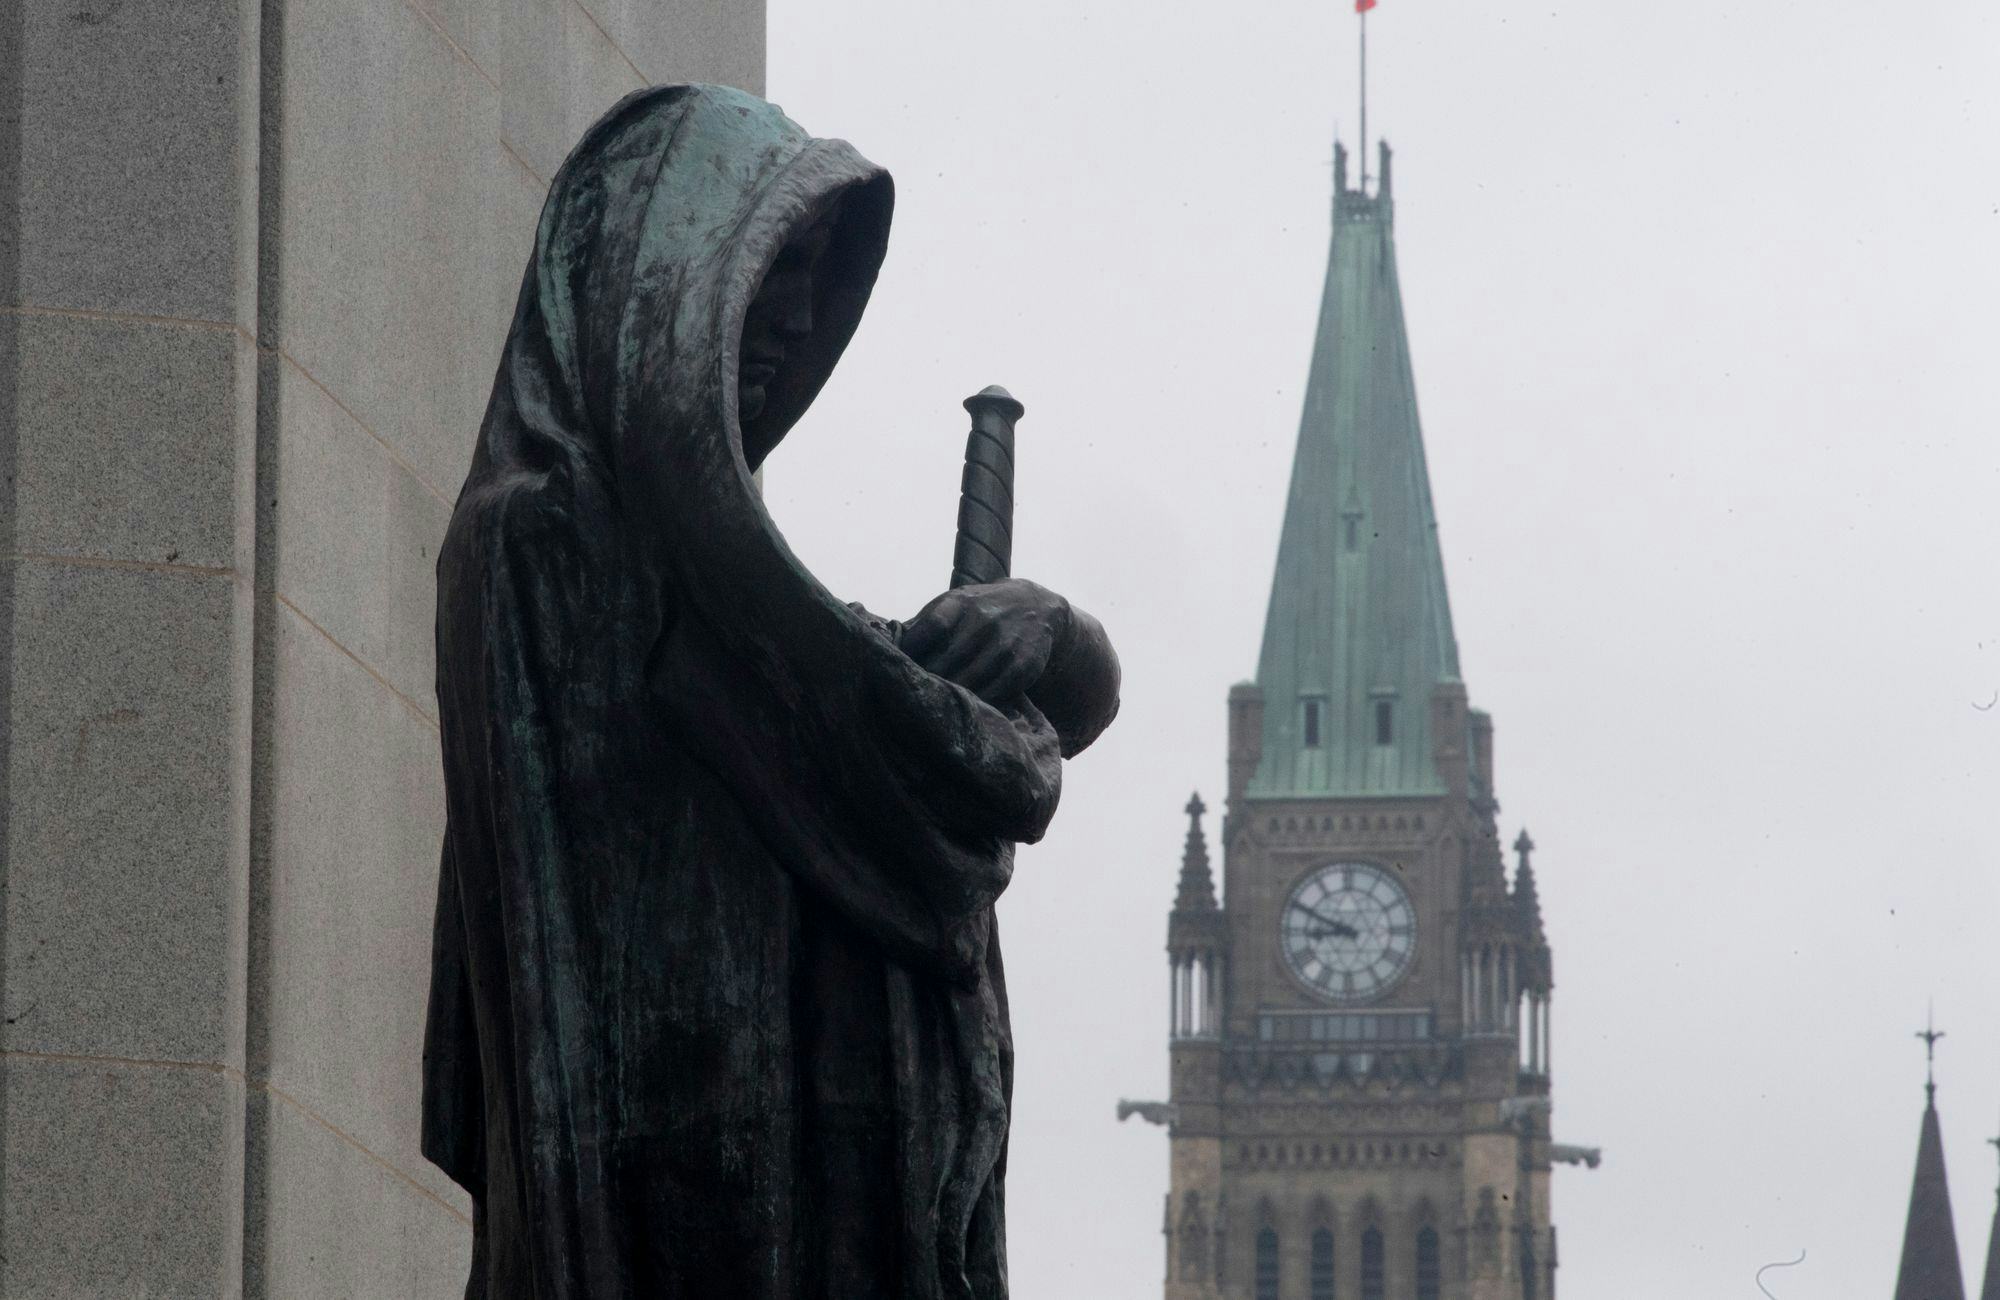 Justice statue at Supreme Court of Canada